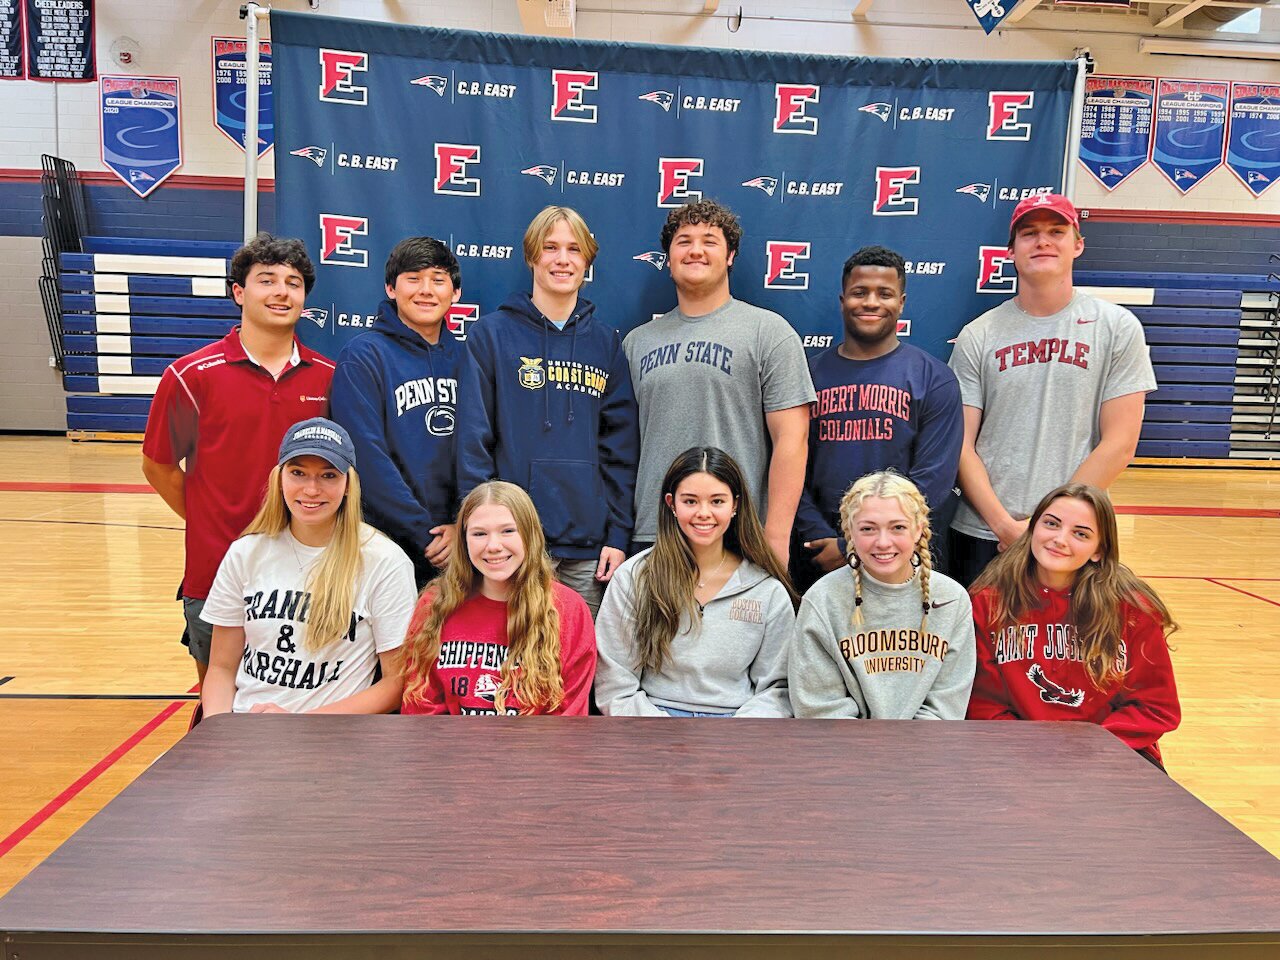 Central Bucks East seniors were recognized last month for their commitment to compete at the collegiate level. From left are: front row, Erin Suter, Carly Byrne, Alisa Cufone, Amelia Alfiero, Alessandra Schuster; back row, Luke Christmas, Dylan Walker, Matthew LaBouliere, Liam Powers, Ethan Shine and Patrick Keller.